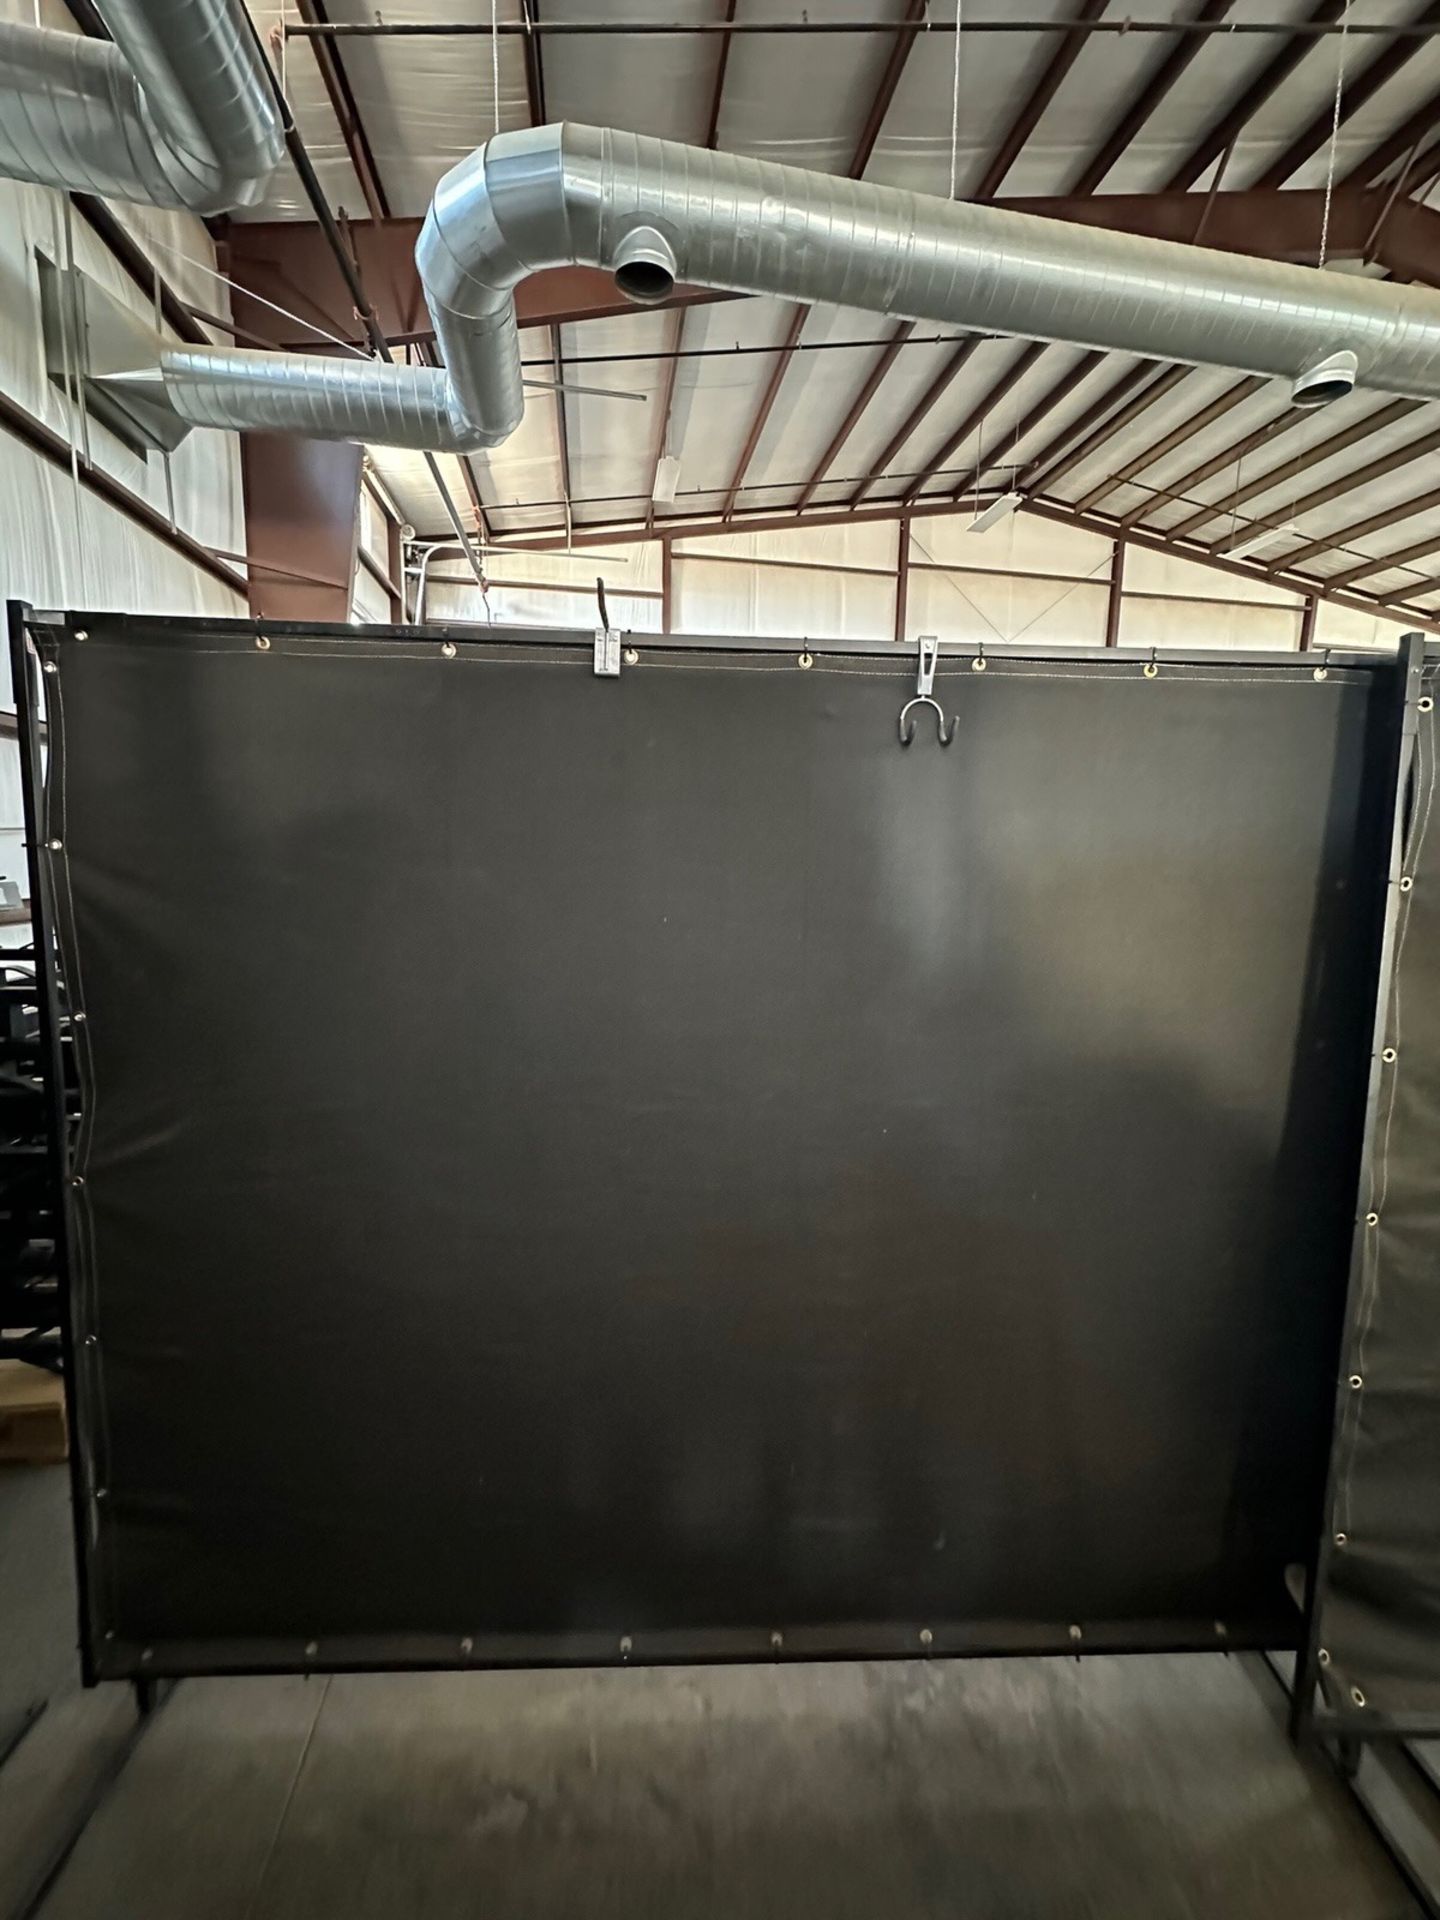 6 Welding Curtains | Rig Fee $50 - Image 5 of 6